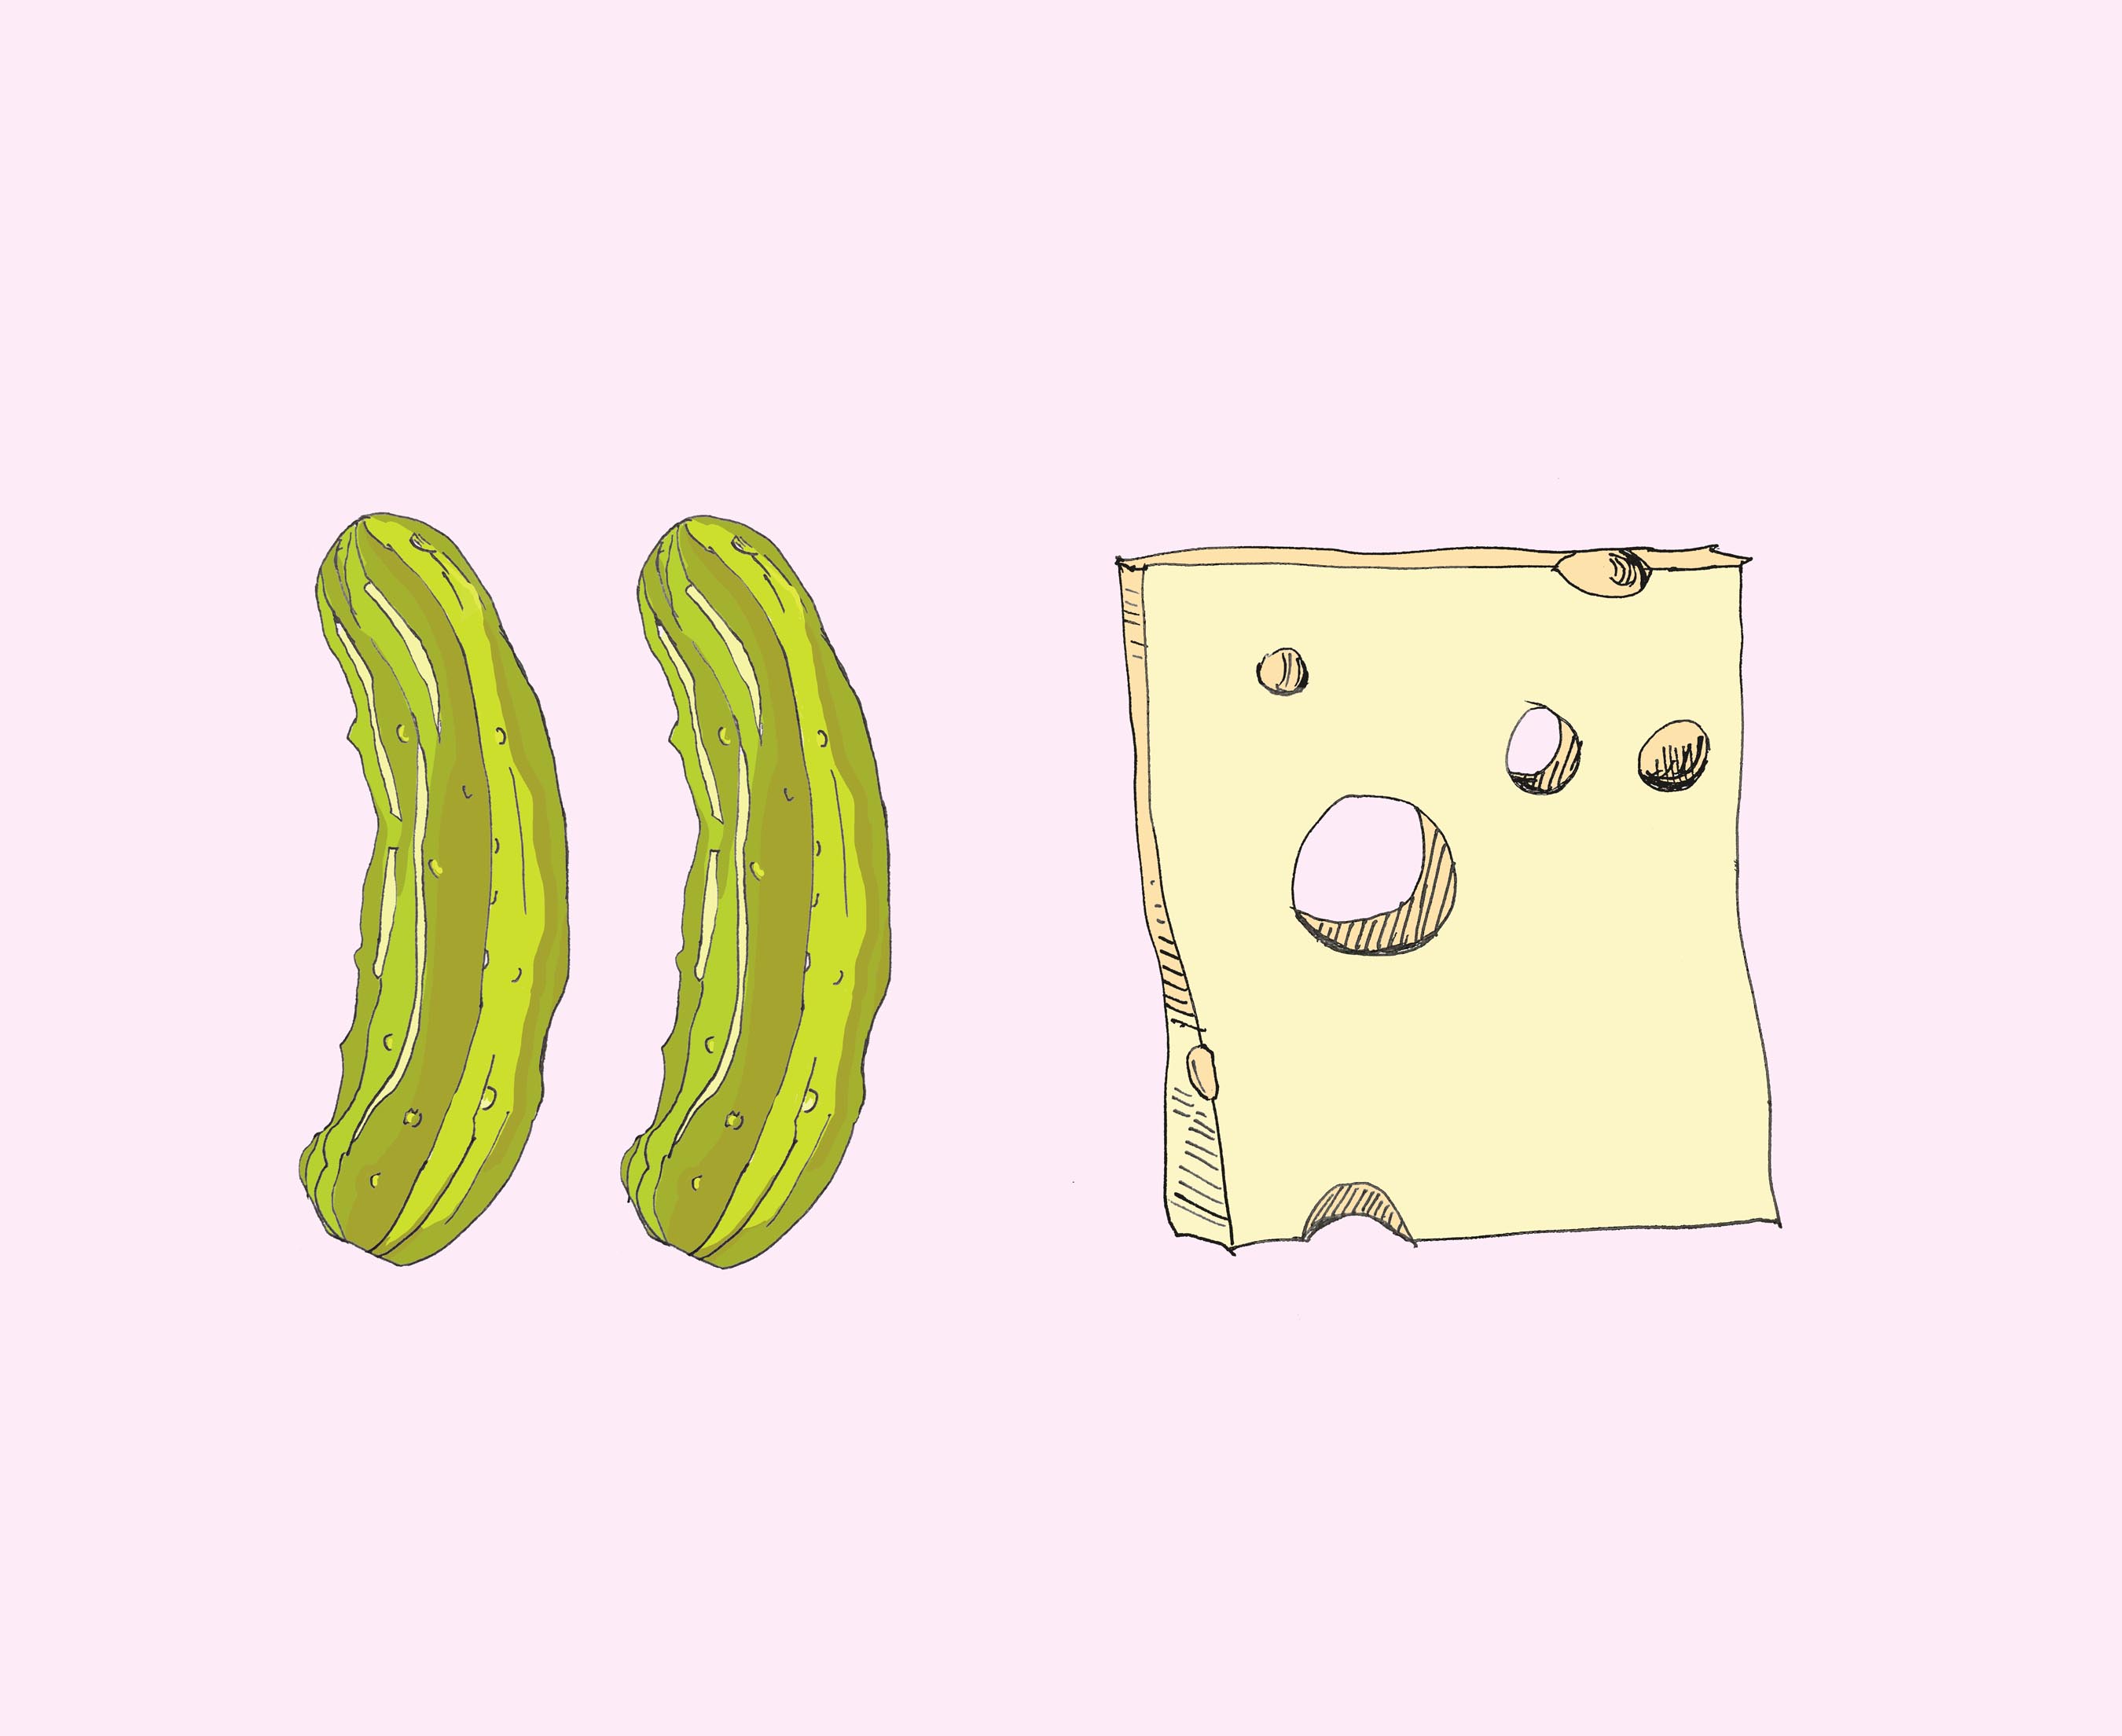 art every day number 416 pickles and cheese distraction busy mind worries nonsensical janet bright